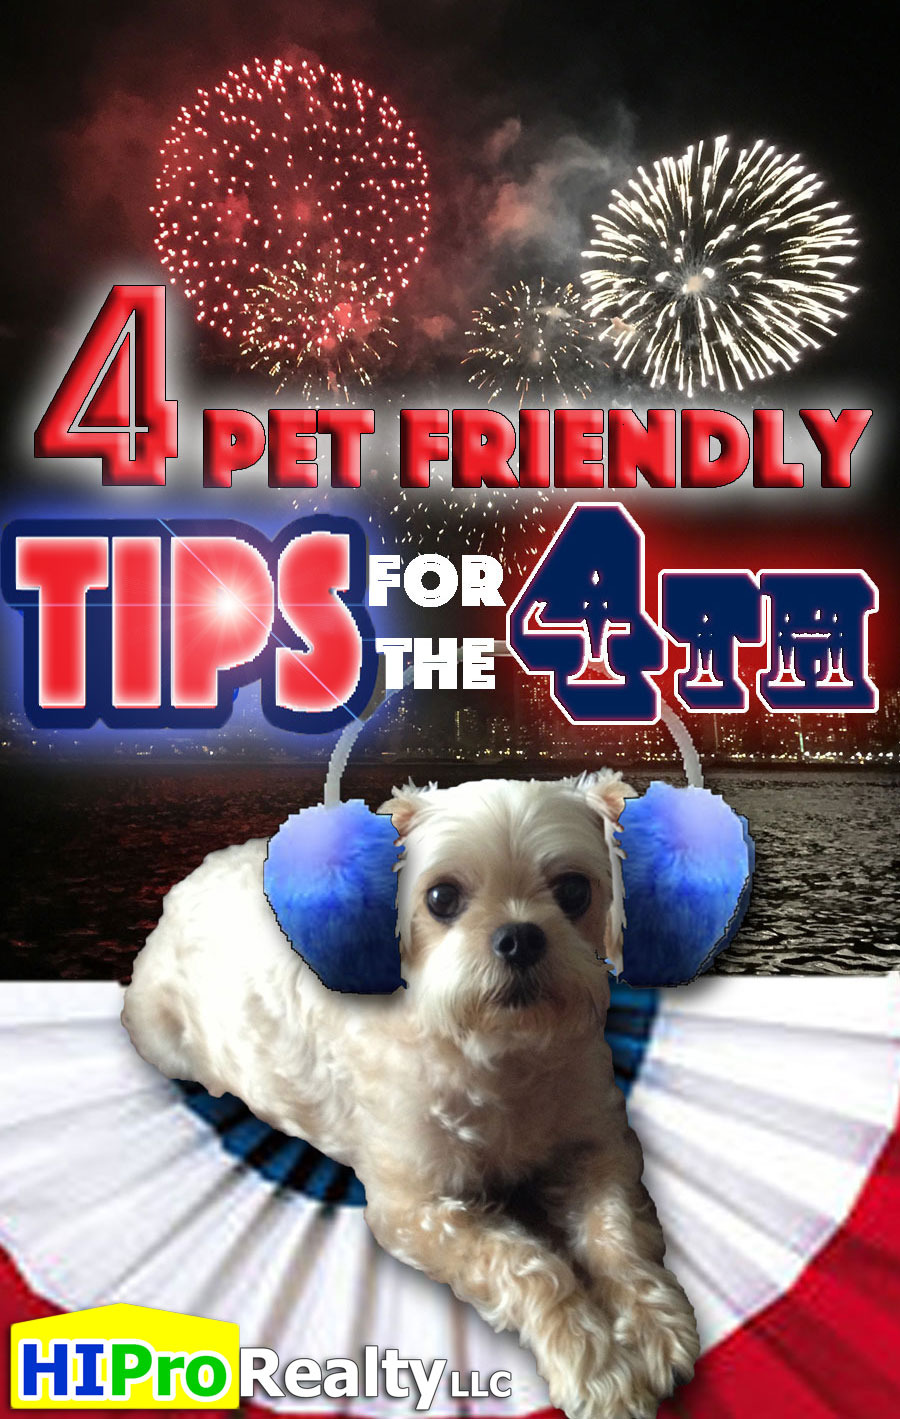 Four PET FRIENDLY Tips for a Happy 4th of July